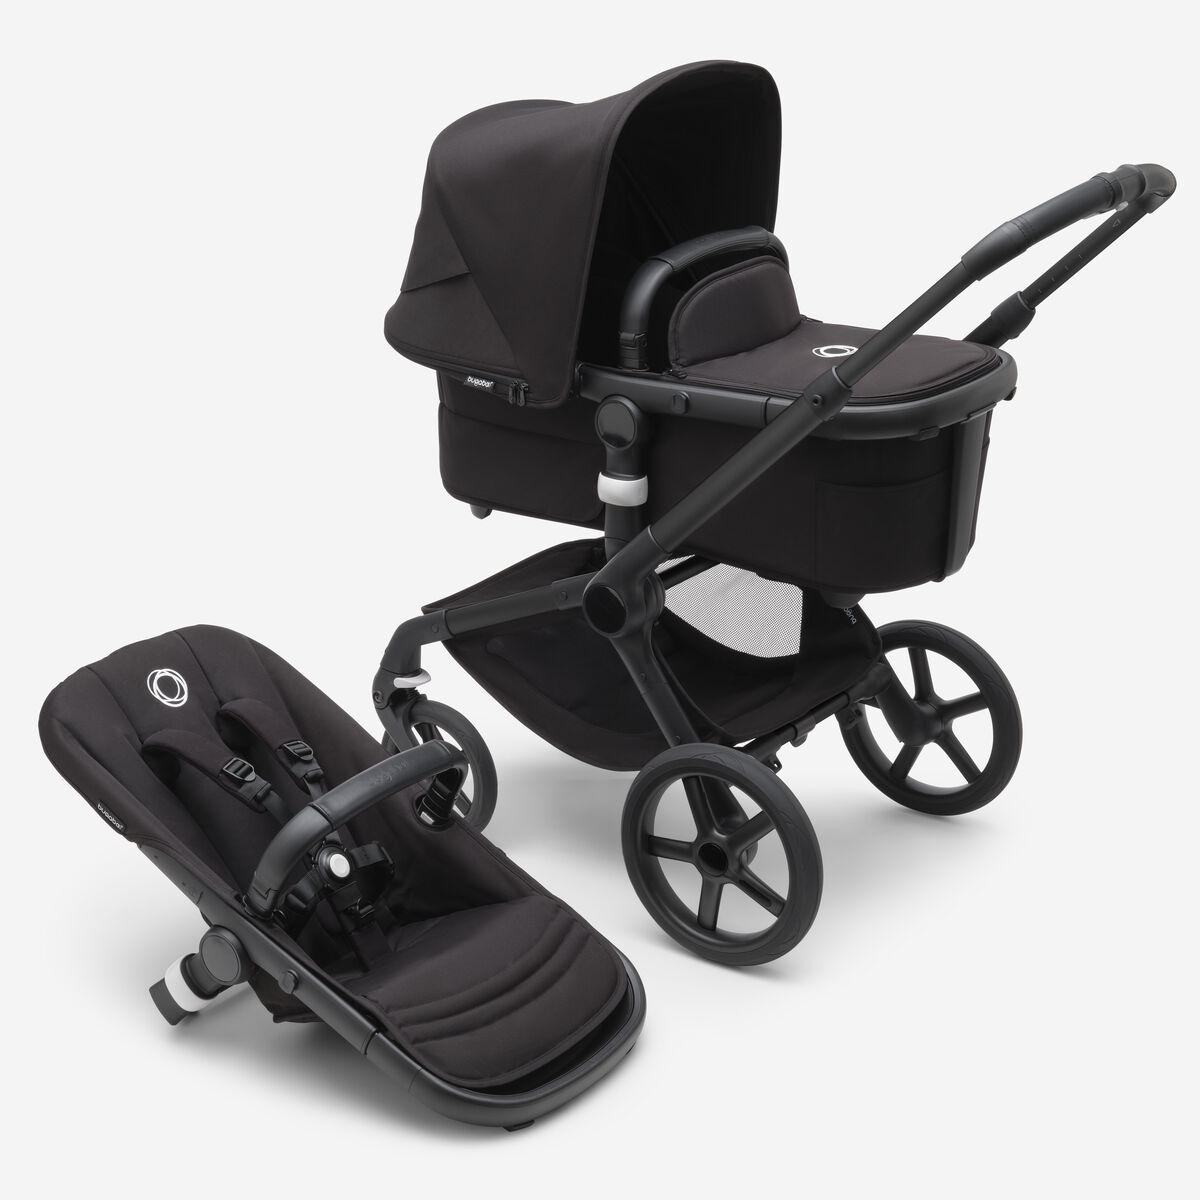 BUGABOOFox5 Carrycot and Seat "MidnightBlack"